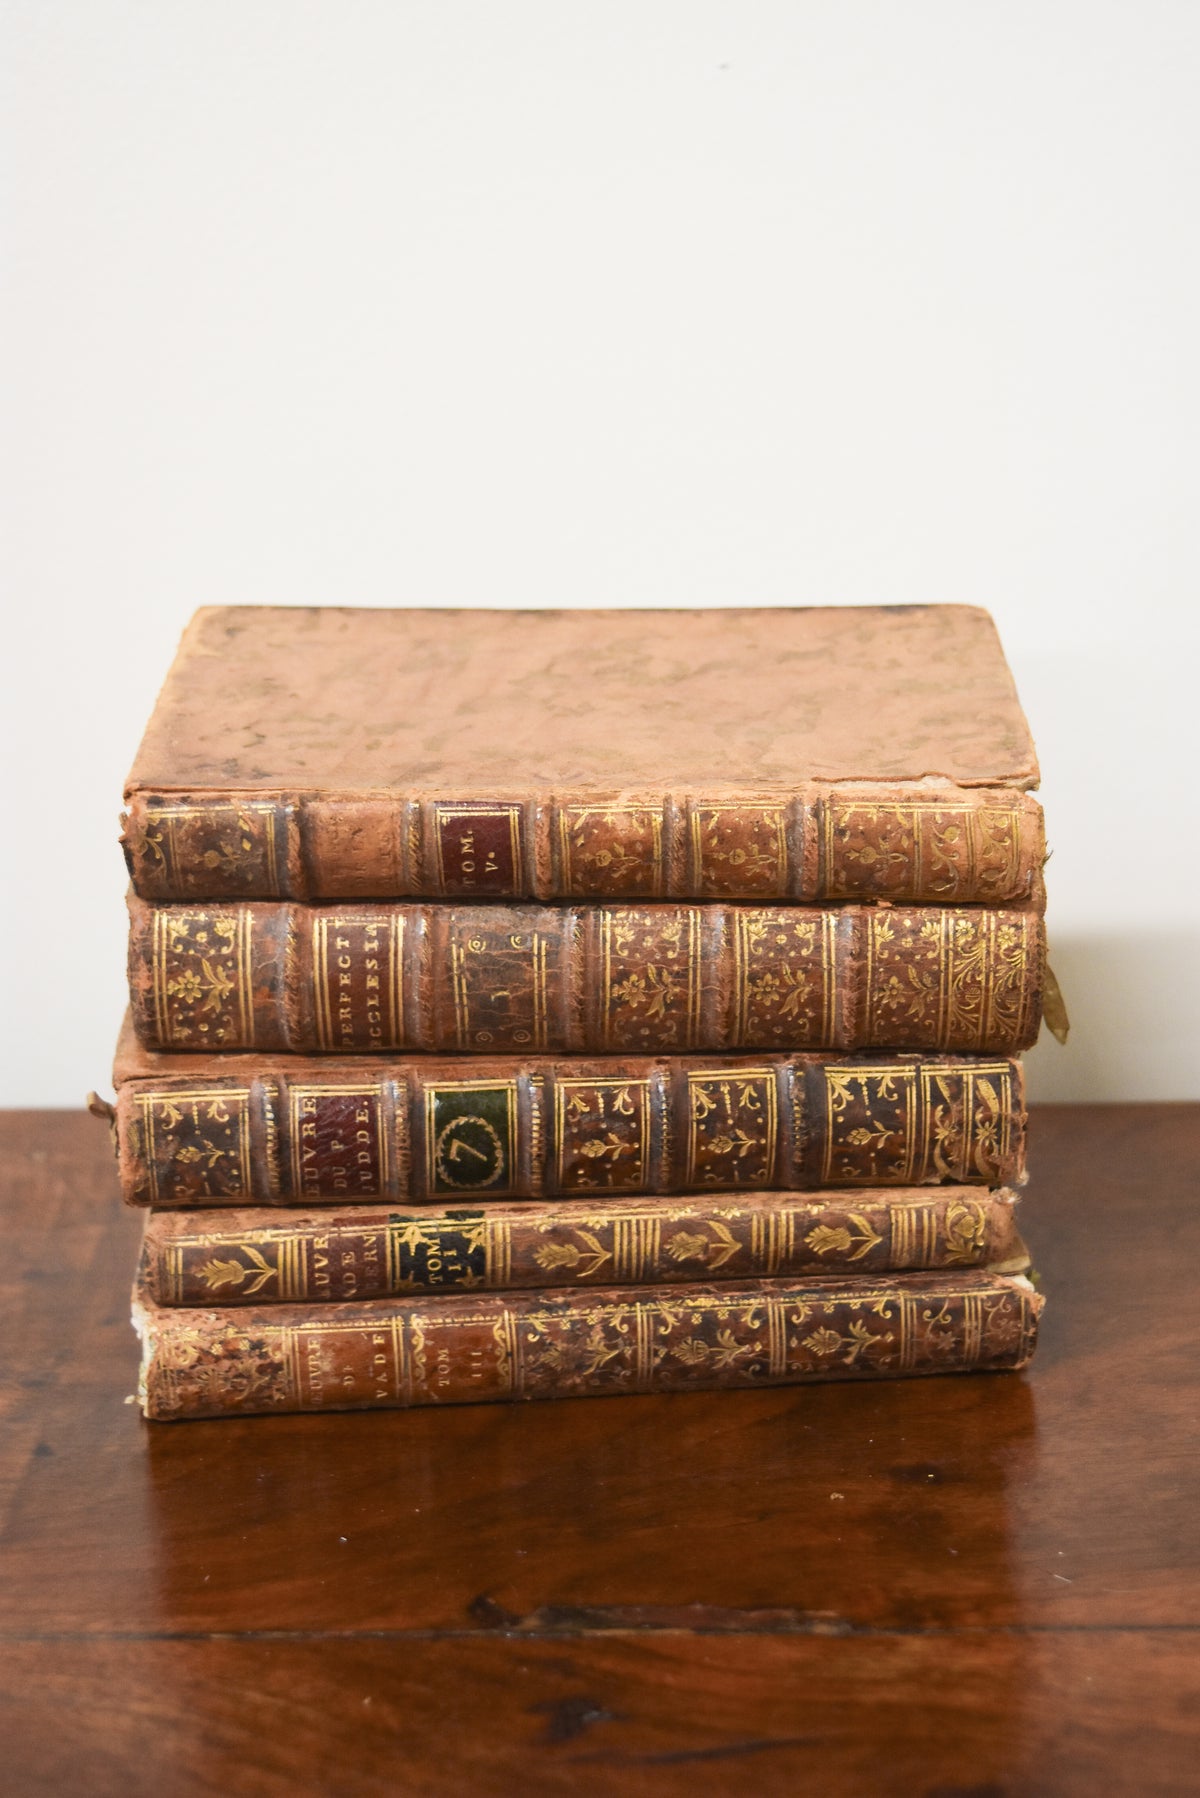 Set of 5 Antique Leatherback Books with Blue Marbleized Pages